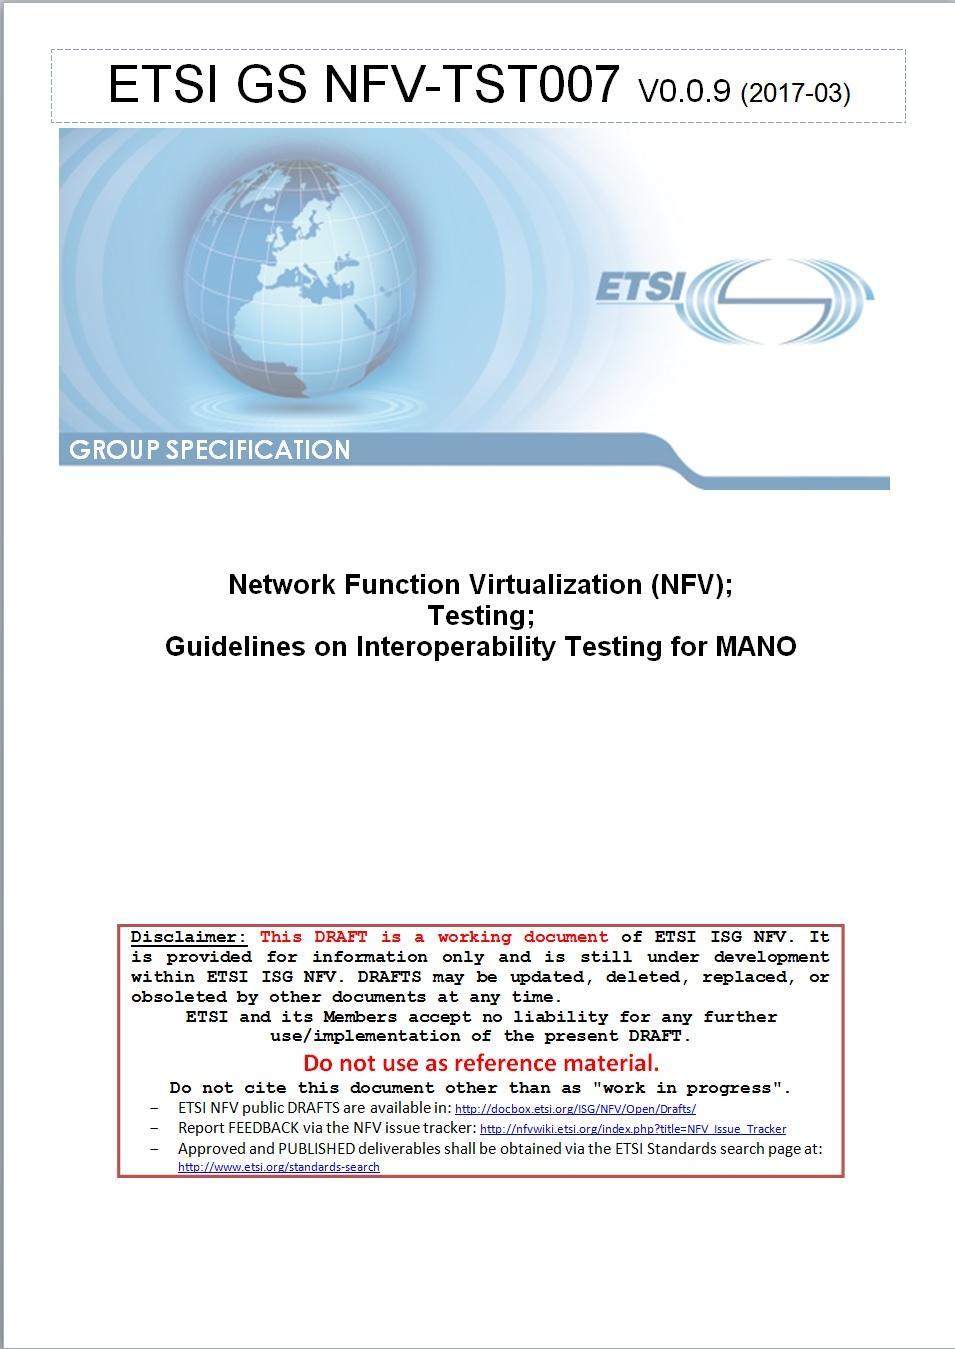 Upcoming NIA MANO Test Evaluation of multi-vendor interoperability between Management and Orchestration (MANO) functions and Virtual Infrastructure Management (VIM) Test plan is subset of ETSI TST007